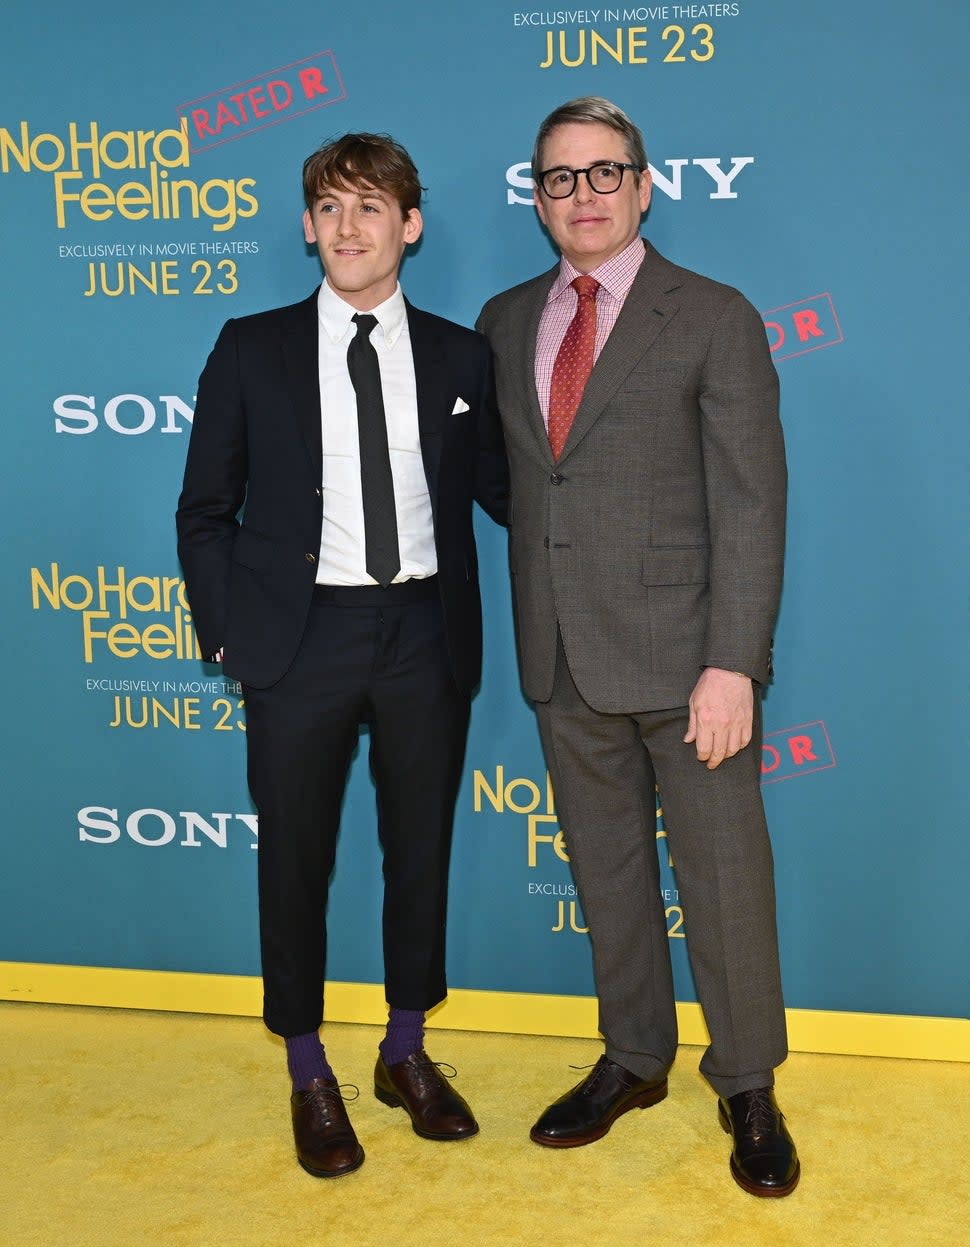 Matthew Broderick attends No Hard Feelings premiere with son